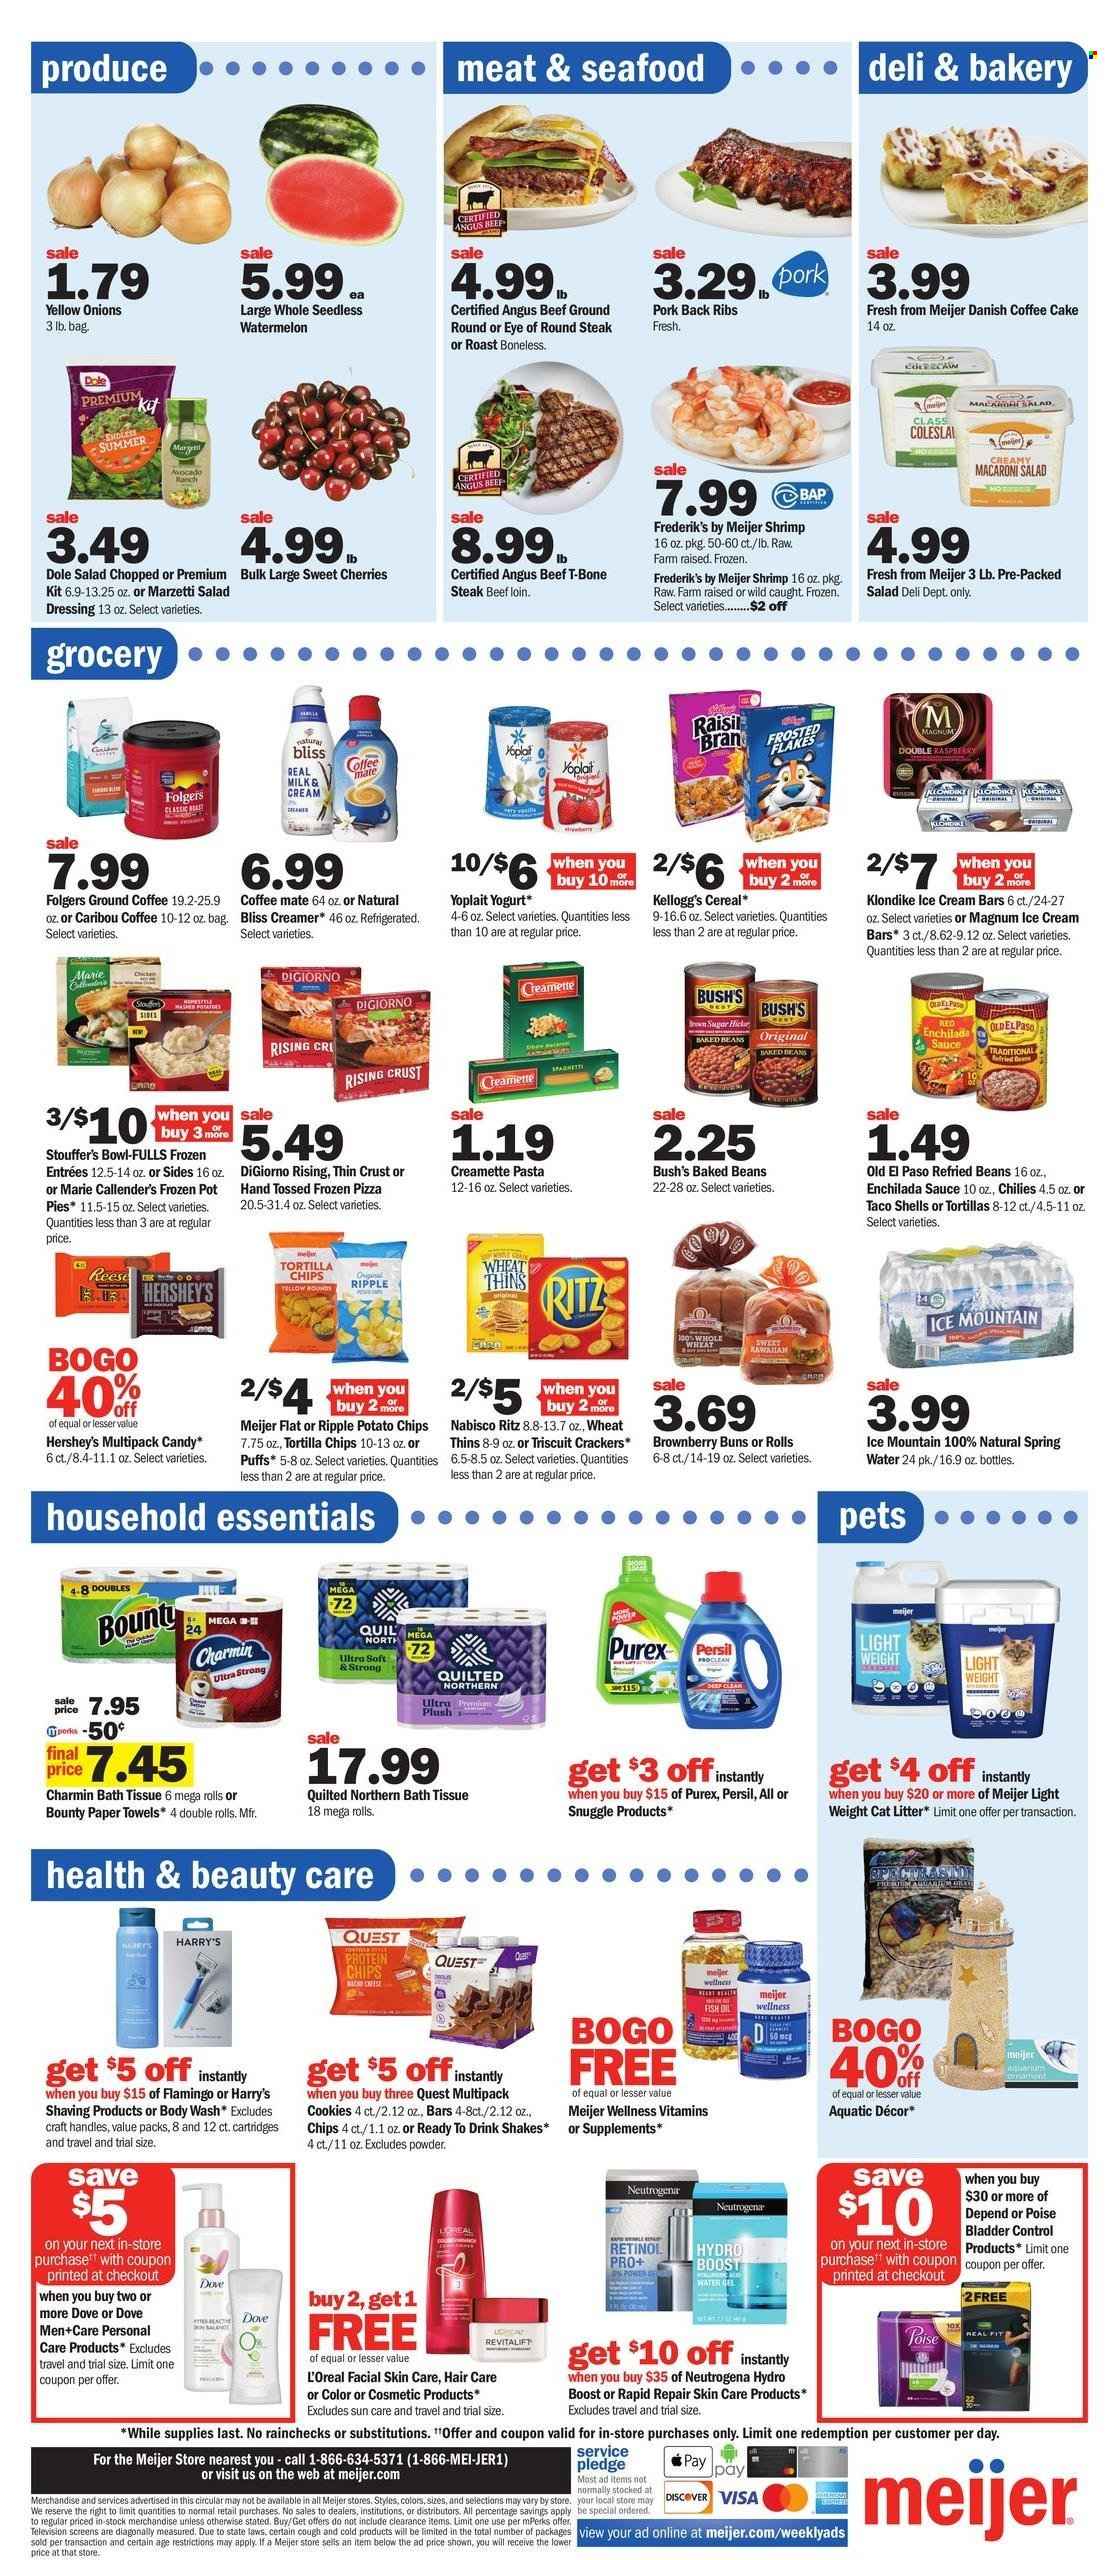 thumbnail - Meijer Flyer - 05/28/2023 - 06/03/2023 - Sales products - shoes, Skechers, basket, pot, hanging basket, shorts, chair, Intex, pool, parasol, cooling box, onion, watermelon, roast, beef meat, steak, eye of round, round steak, ribs, pork meat, pork ribs, pork back ribs, cake, coffee cake, salad, Dole, salad dressing, dressing, cherries, t-bone steak, shrimps, coffee, Folgers, ground coffee, Coffee-Mate, creamer, Kellogg's, cereals, yoghurt, Yoplait, Magnum, ice cream, ice cream bars, pie, pot pie, Marie Callender's, bowl-fulls, ready meal, Stouffer's, pizza, pasta, Creamette, beans, baked beans, tortillas, Old El Paso, sauce, enchilada sauce, refried beans, Hershey's, Candy, puffs, tortilla chips, potato chips, chips, crackers, RITZ, Nabisco, Thins, buns, spring water, Ice Mountain, water, Bounty, bath tissue, kitchen towels, paper towels, Charmin, Quilted Northern, Persil, Purex, cat litter, body wash, aquarium ornaments, shake, cookies, dietary supplement, Dove, L’Oréal, sanitary pads, Poise, Neutrogena. Page 2.